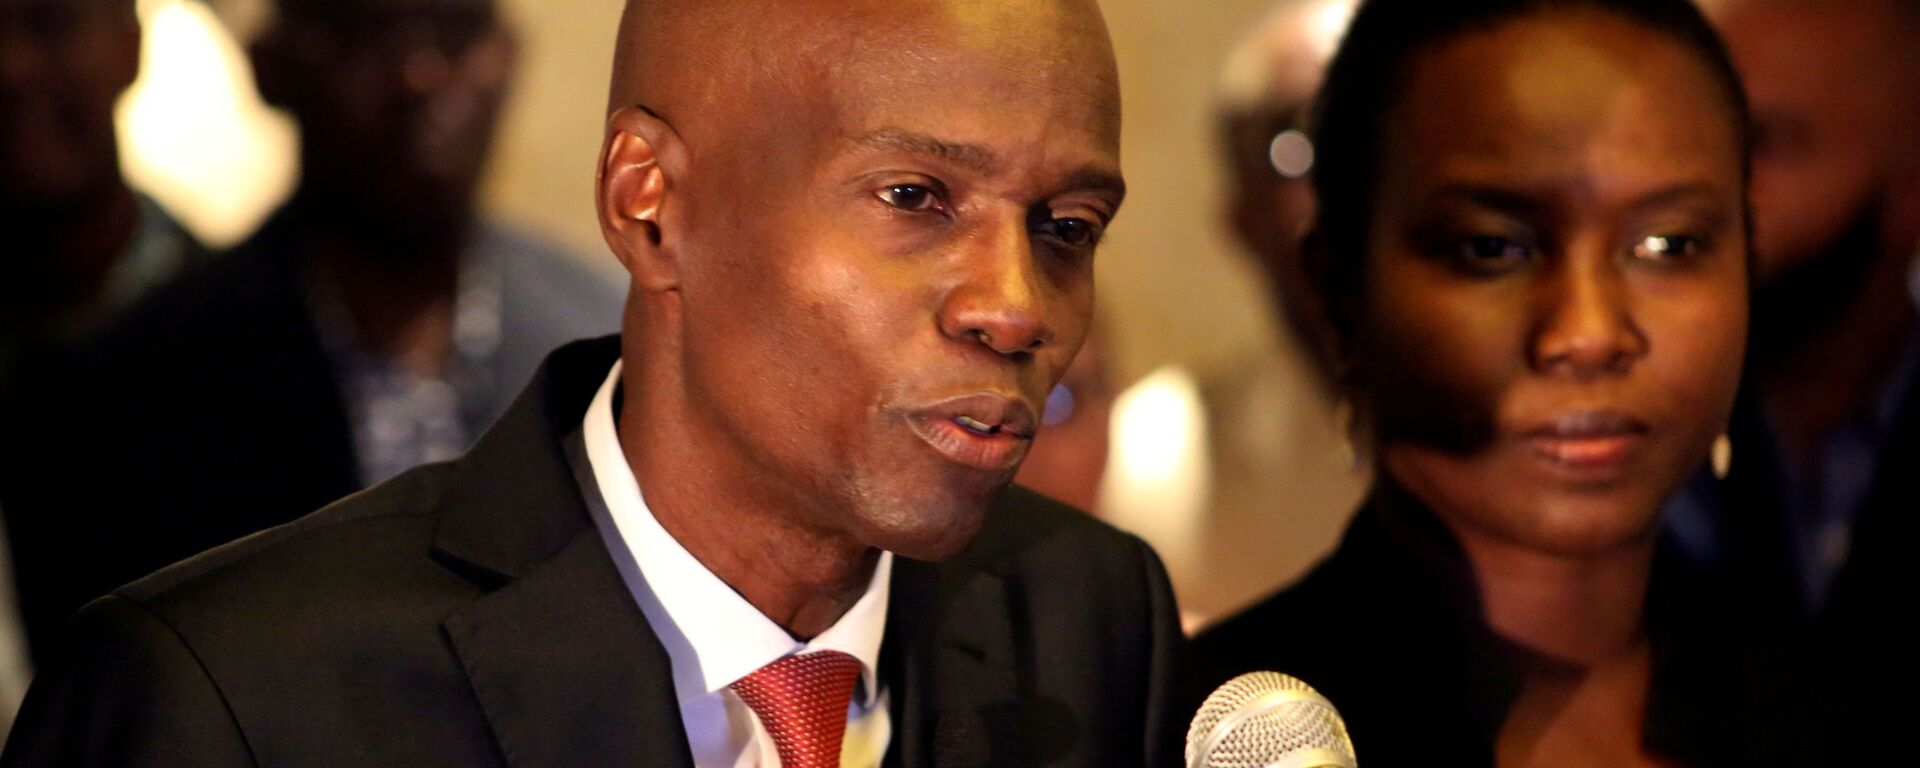 FILE PHOTO: Jovenel Moise addresses the media next to his wife Martine after winning the 2016 presidential election, in Port-au-Prince, Haiti. Picture taken 28 November 2016 - Sputnik International, 1920, 03.08.2021